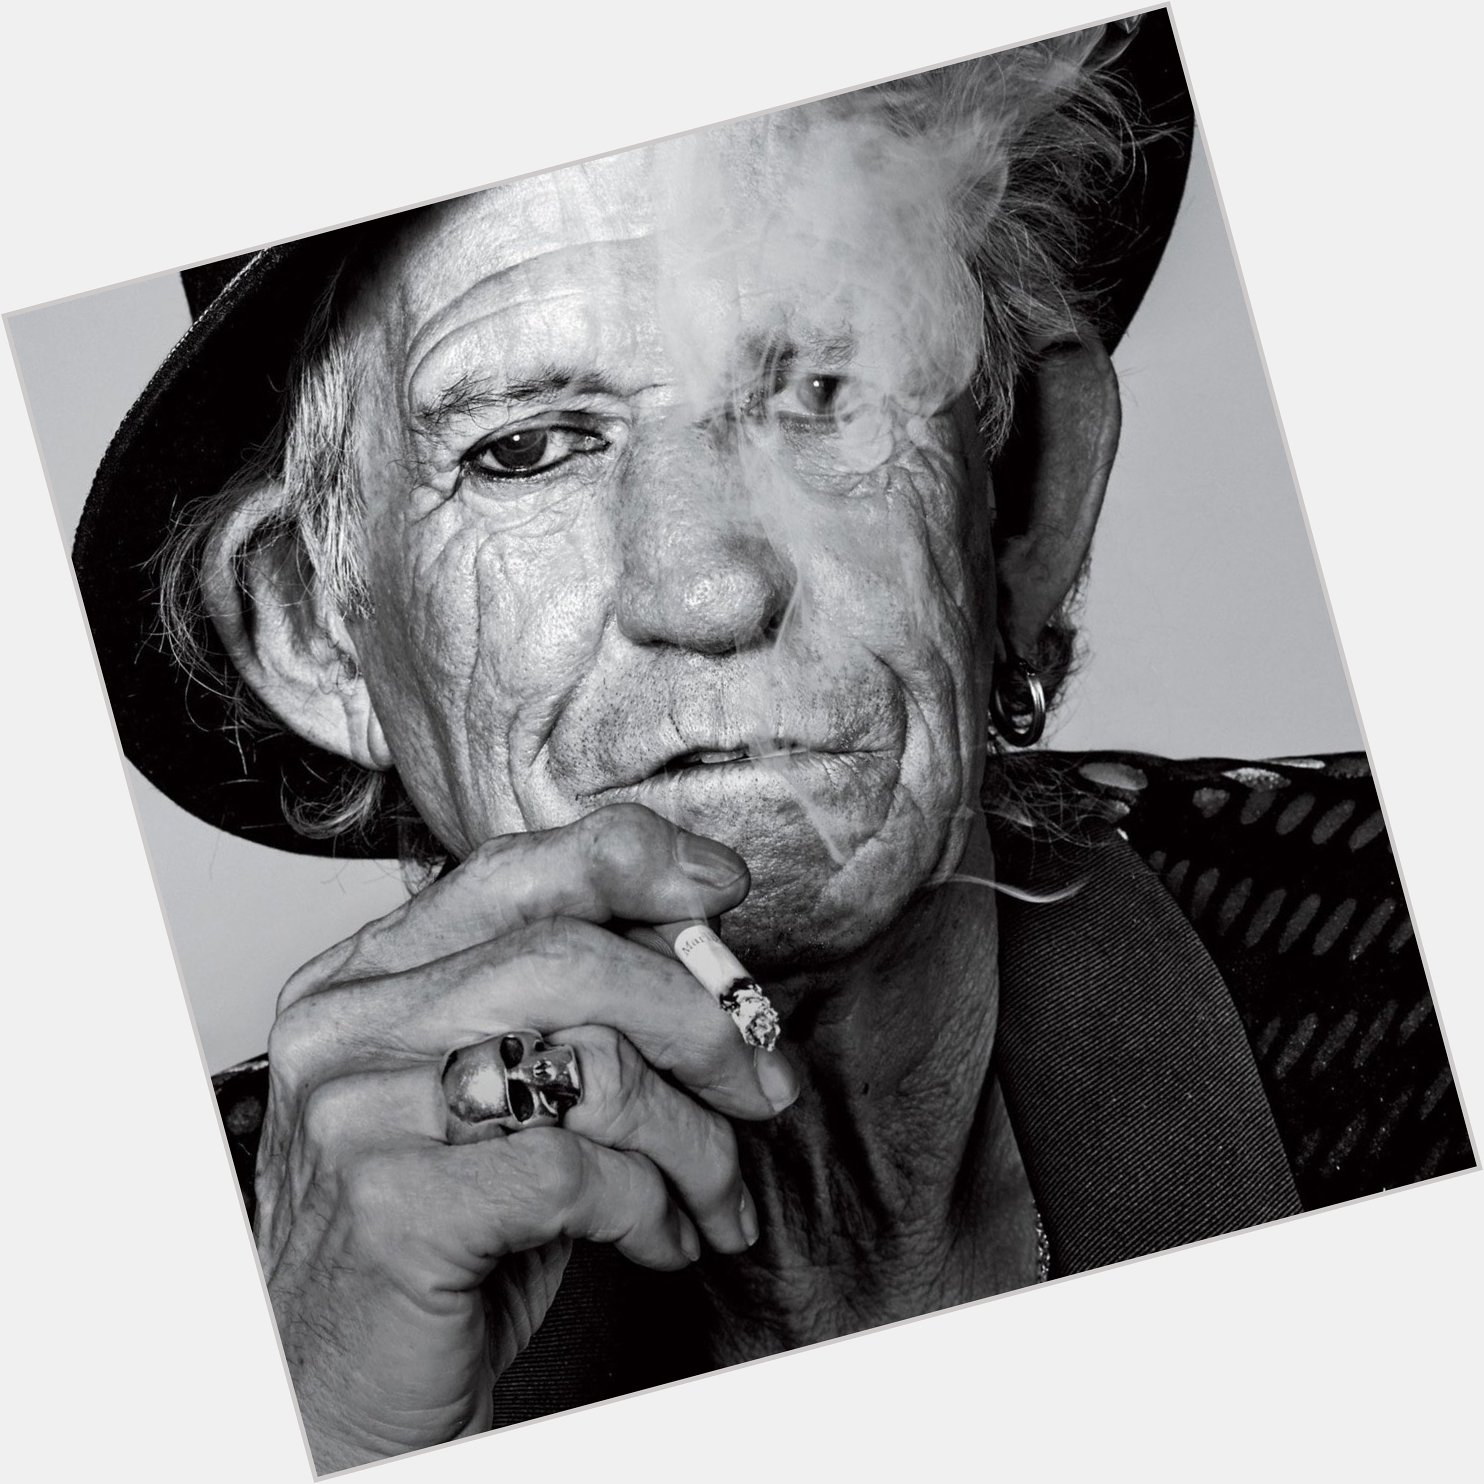 Happy 77th birthday to Keith Richards of The Rolling Stones ! 